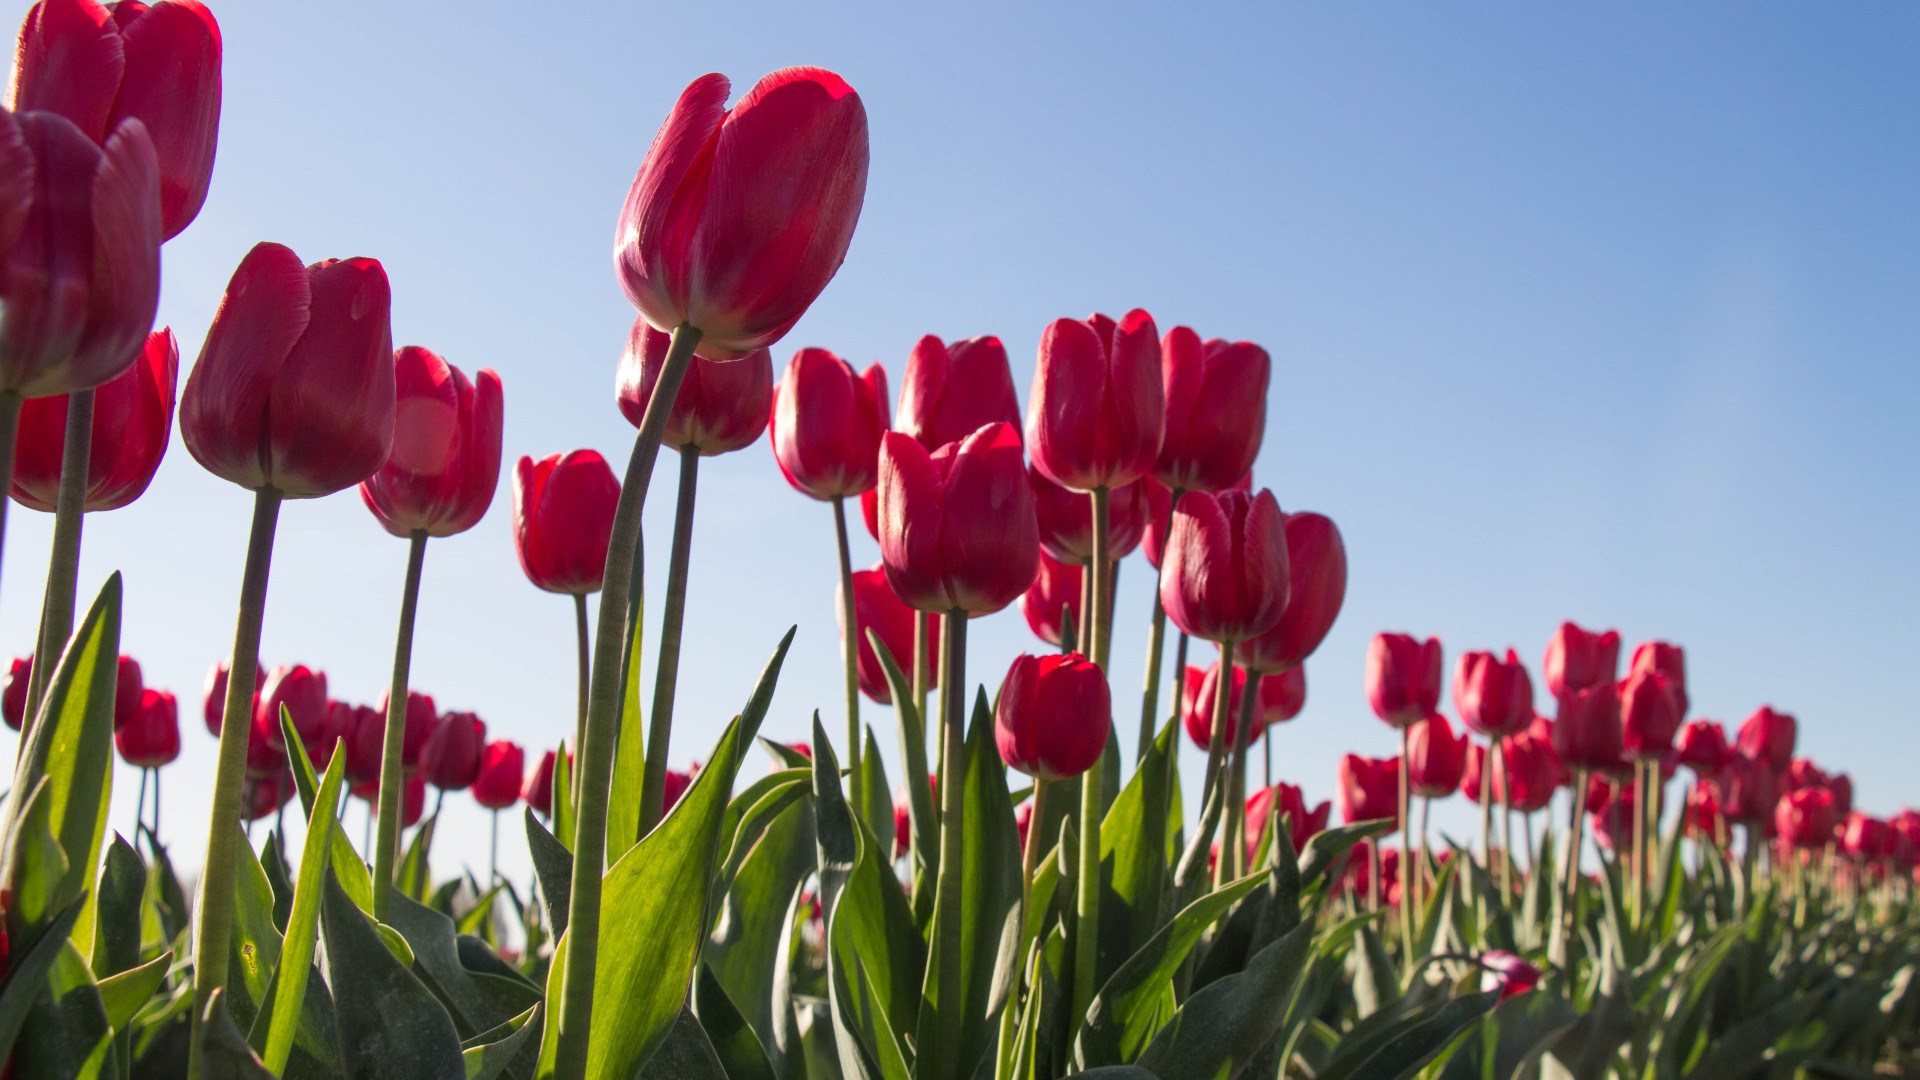 Red tulips wallpaper 1920x1080